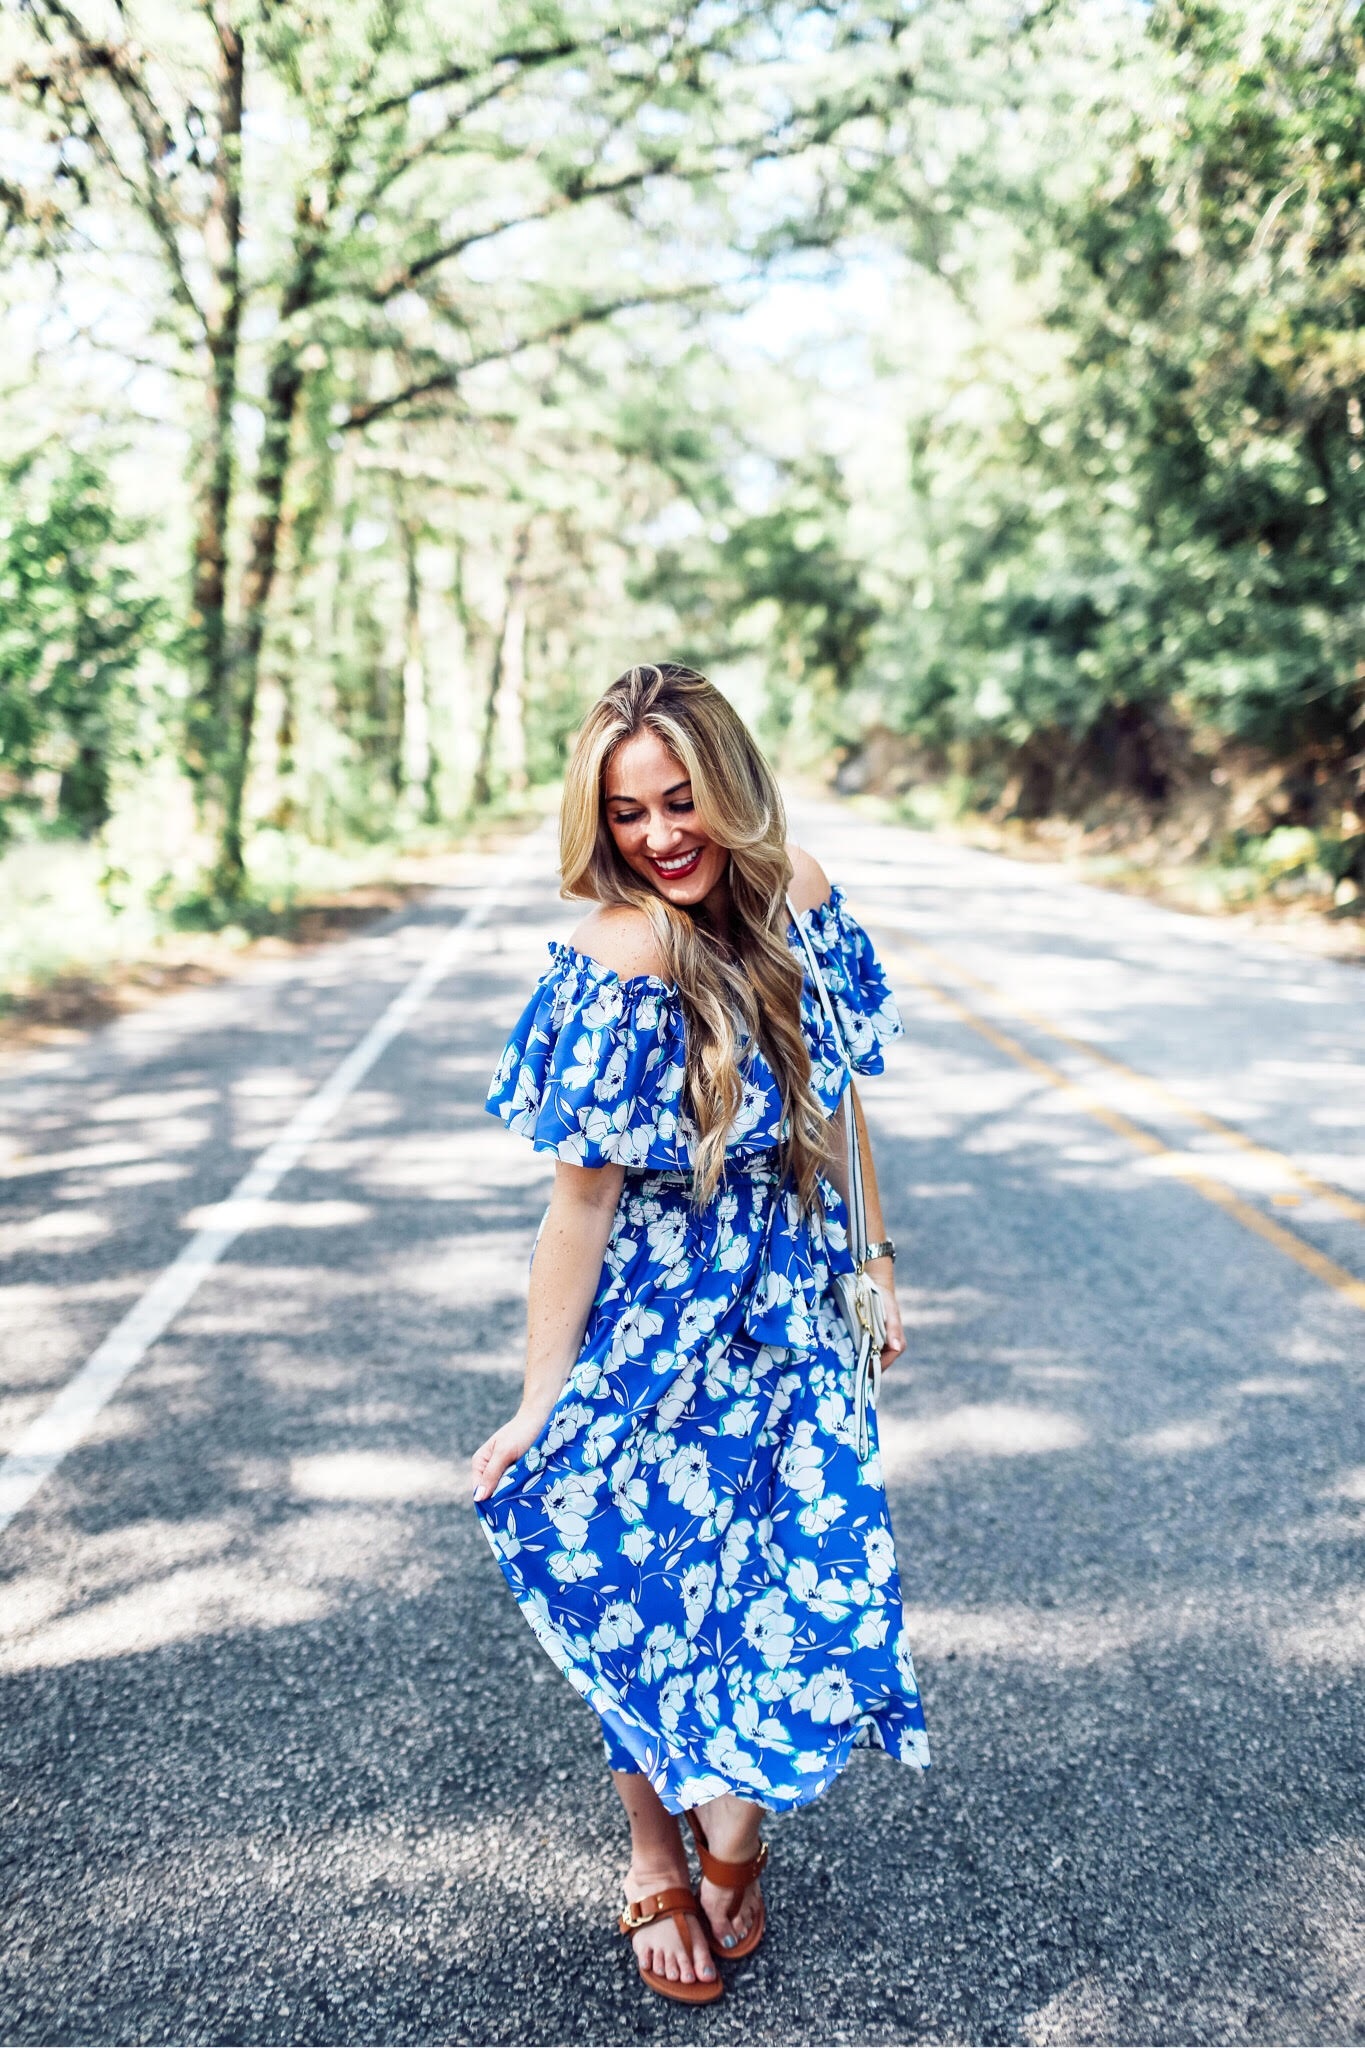 Nordstrom cute floral dresses featured by popular fashion blogger, Walking in Memphis in High Heels